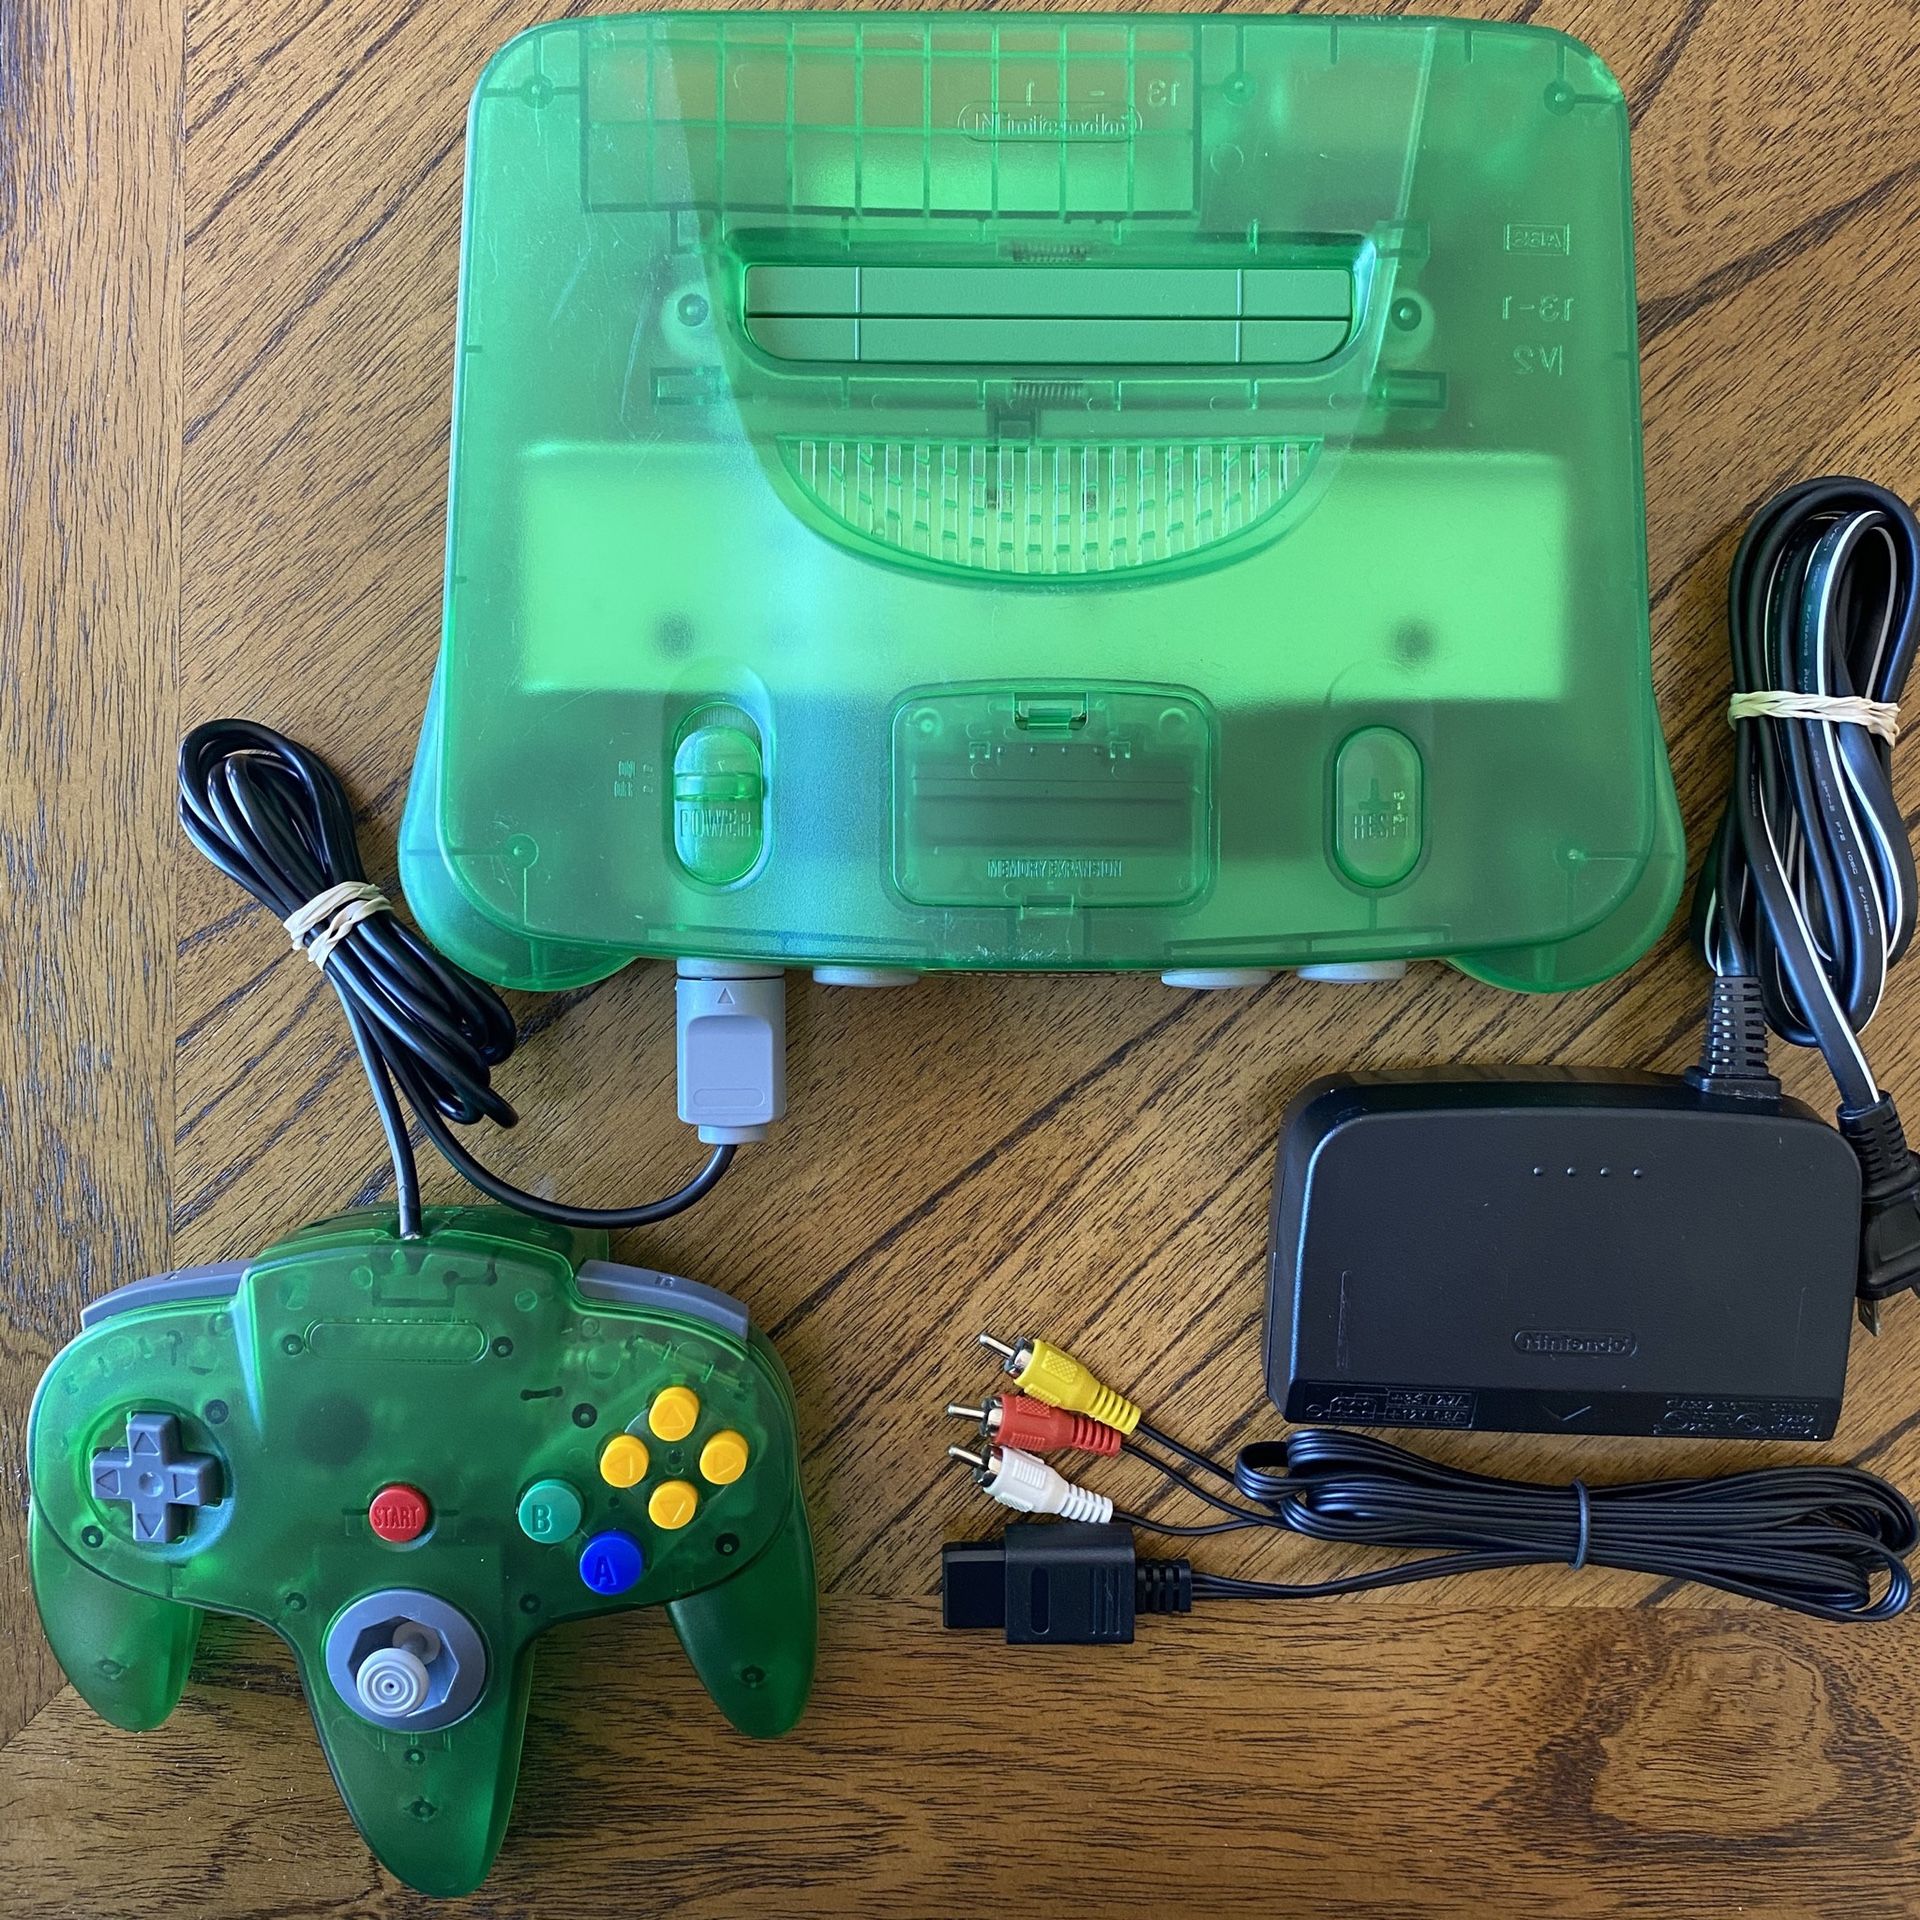 Nintendo 64 Funtastic Jungle Green. Refurbished N64 Console with Controller